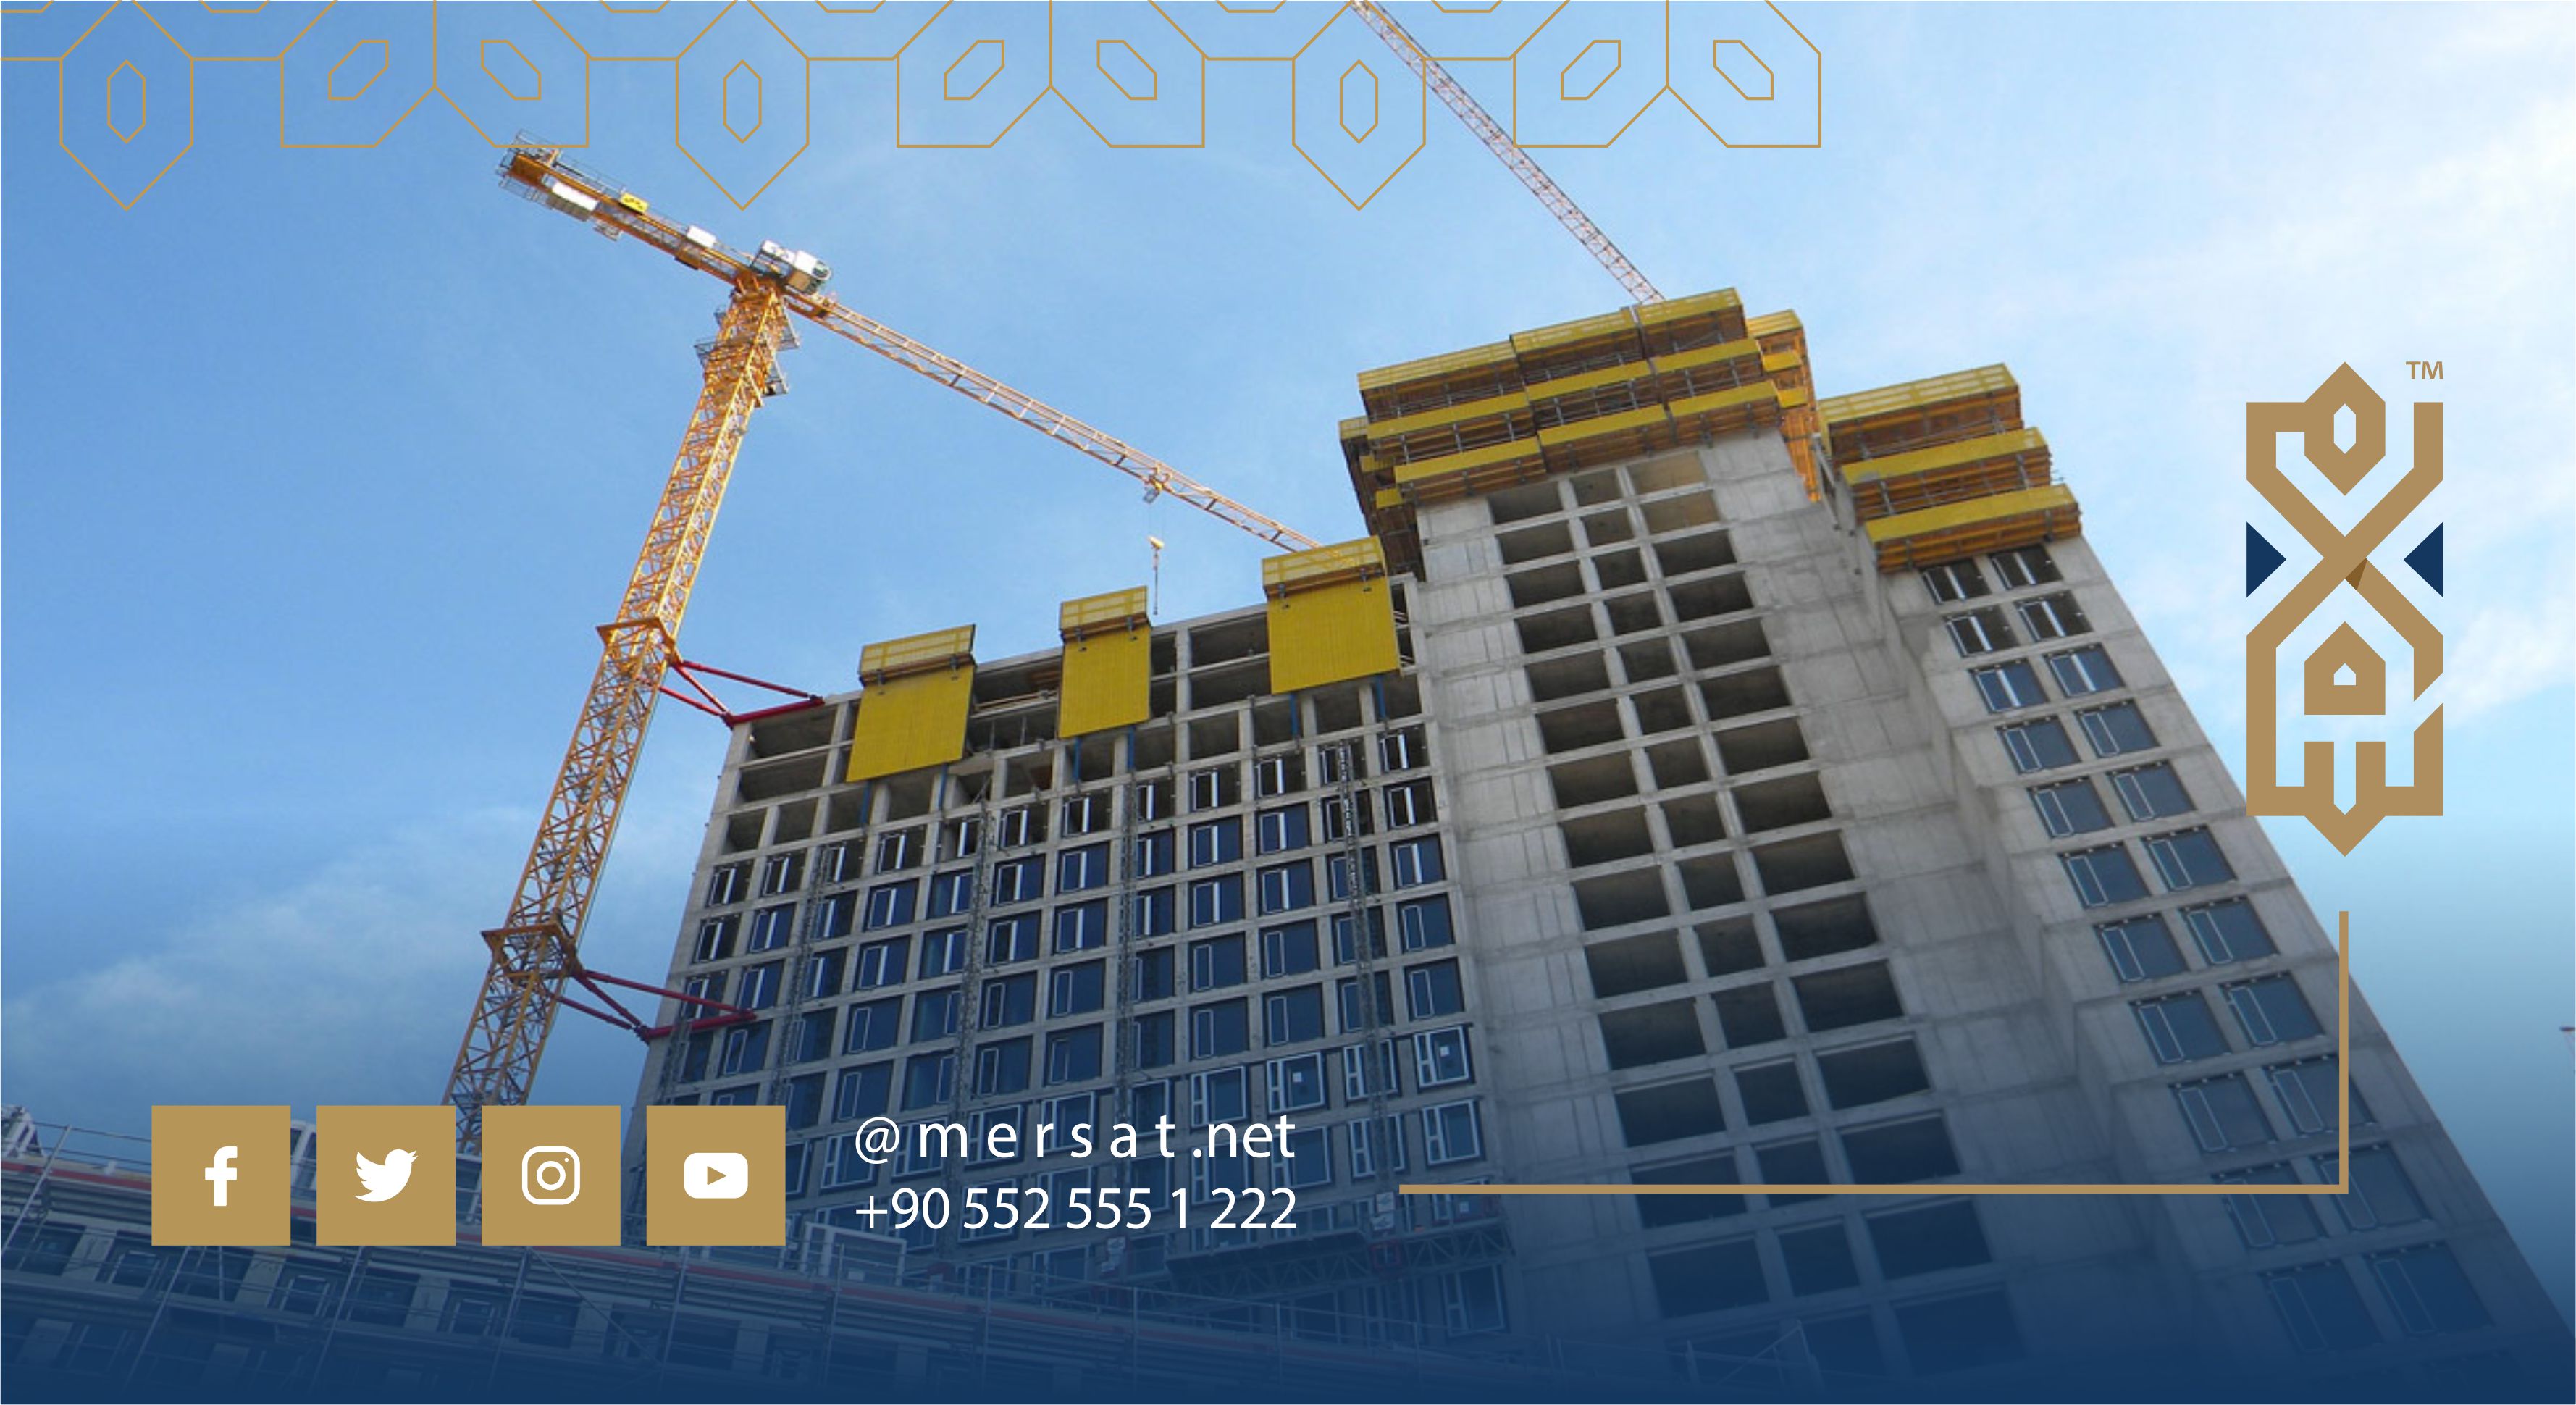 Real estate in Turkey is divided into under construction and ready-to-move properties, which one would you choose?